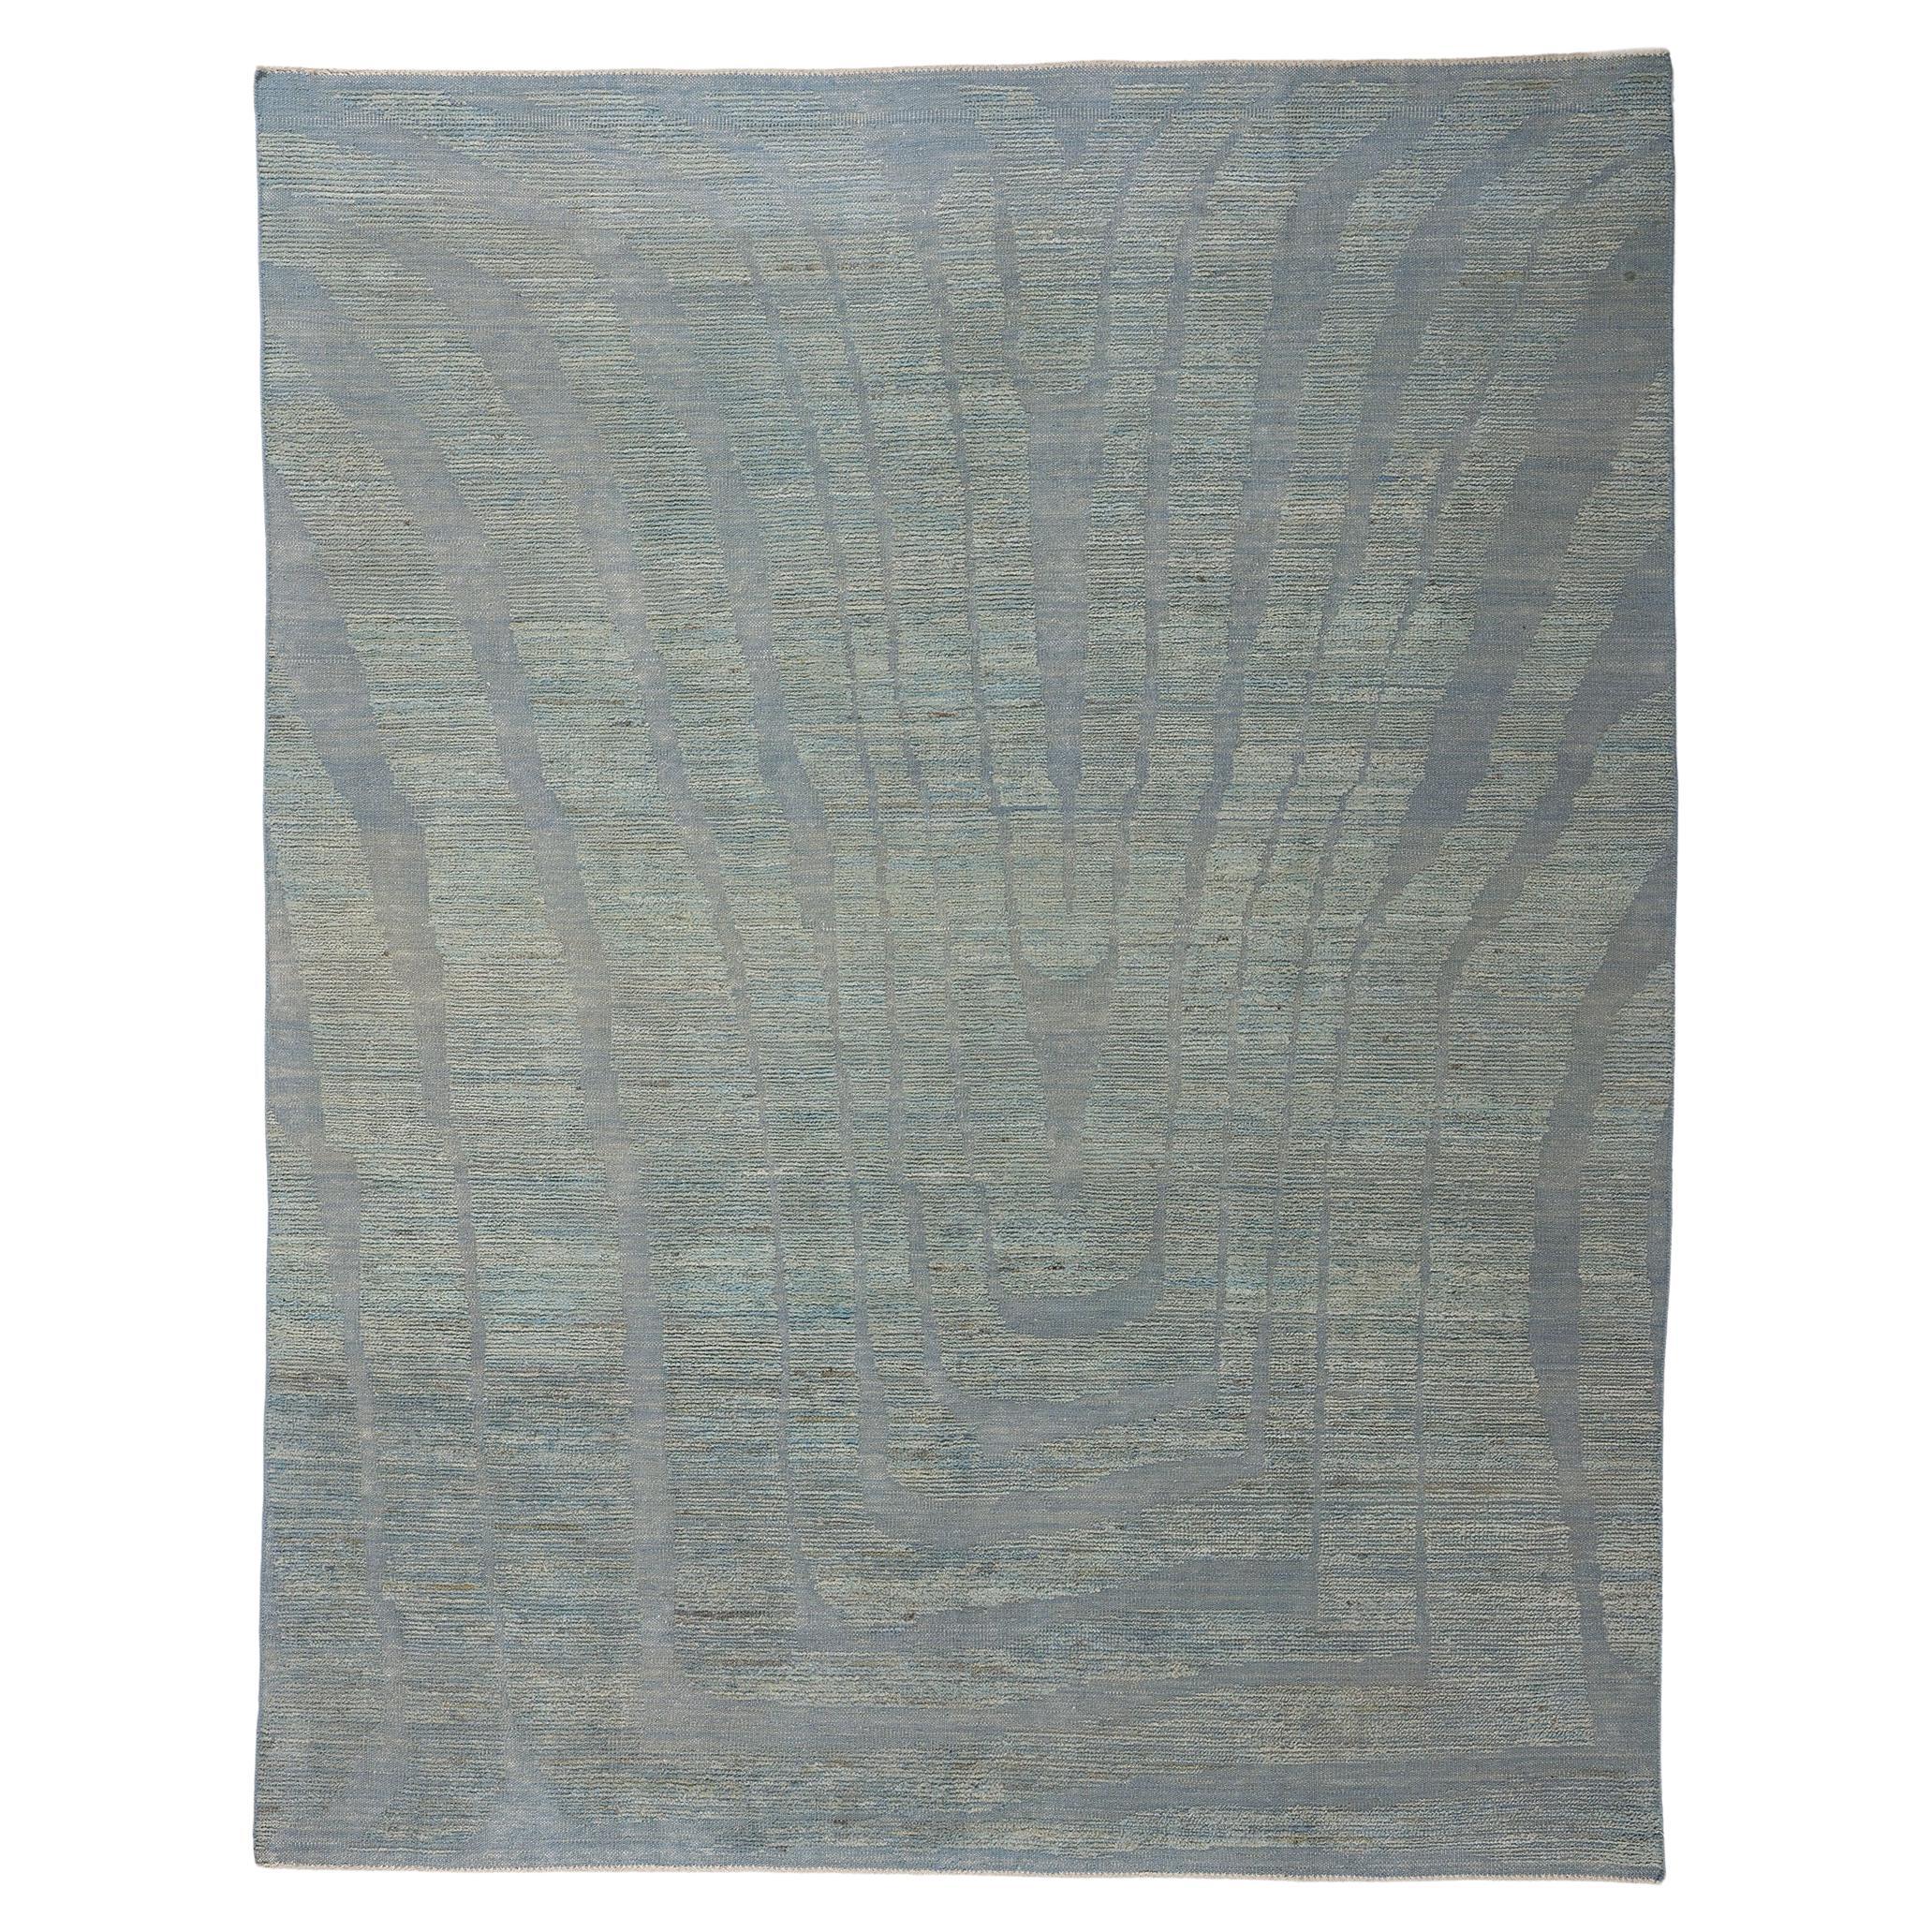 New Blue Moroccan High and Low Wool Pile Biophilic Rug